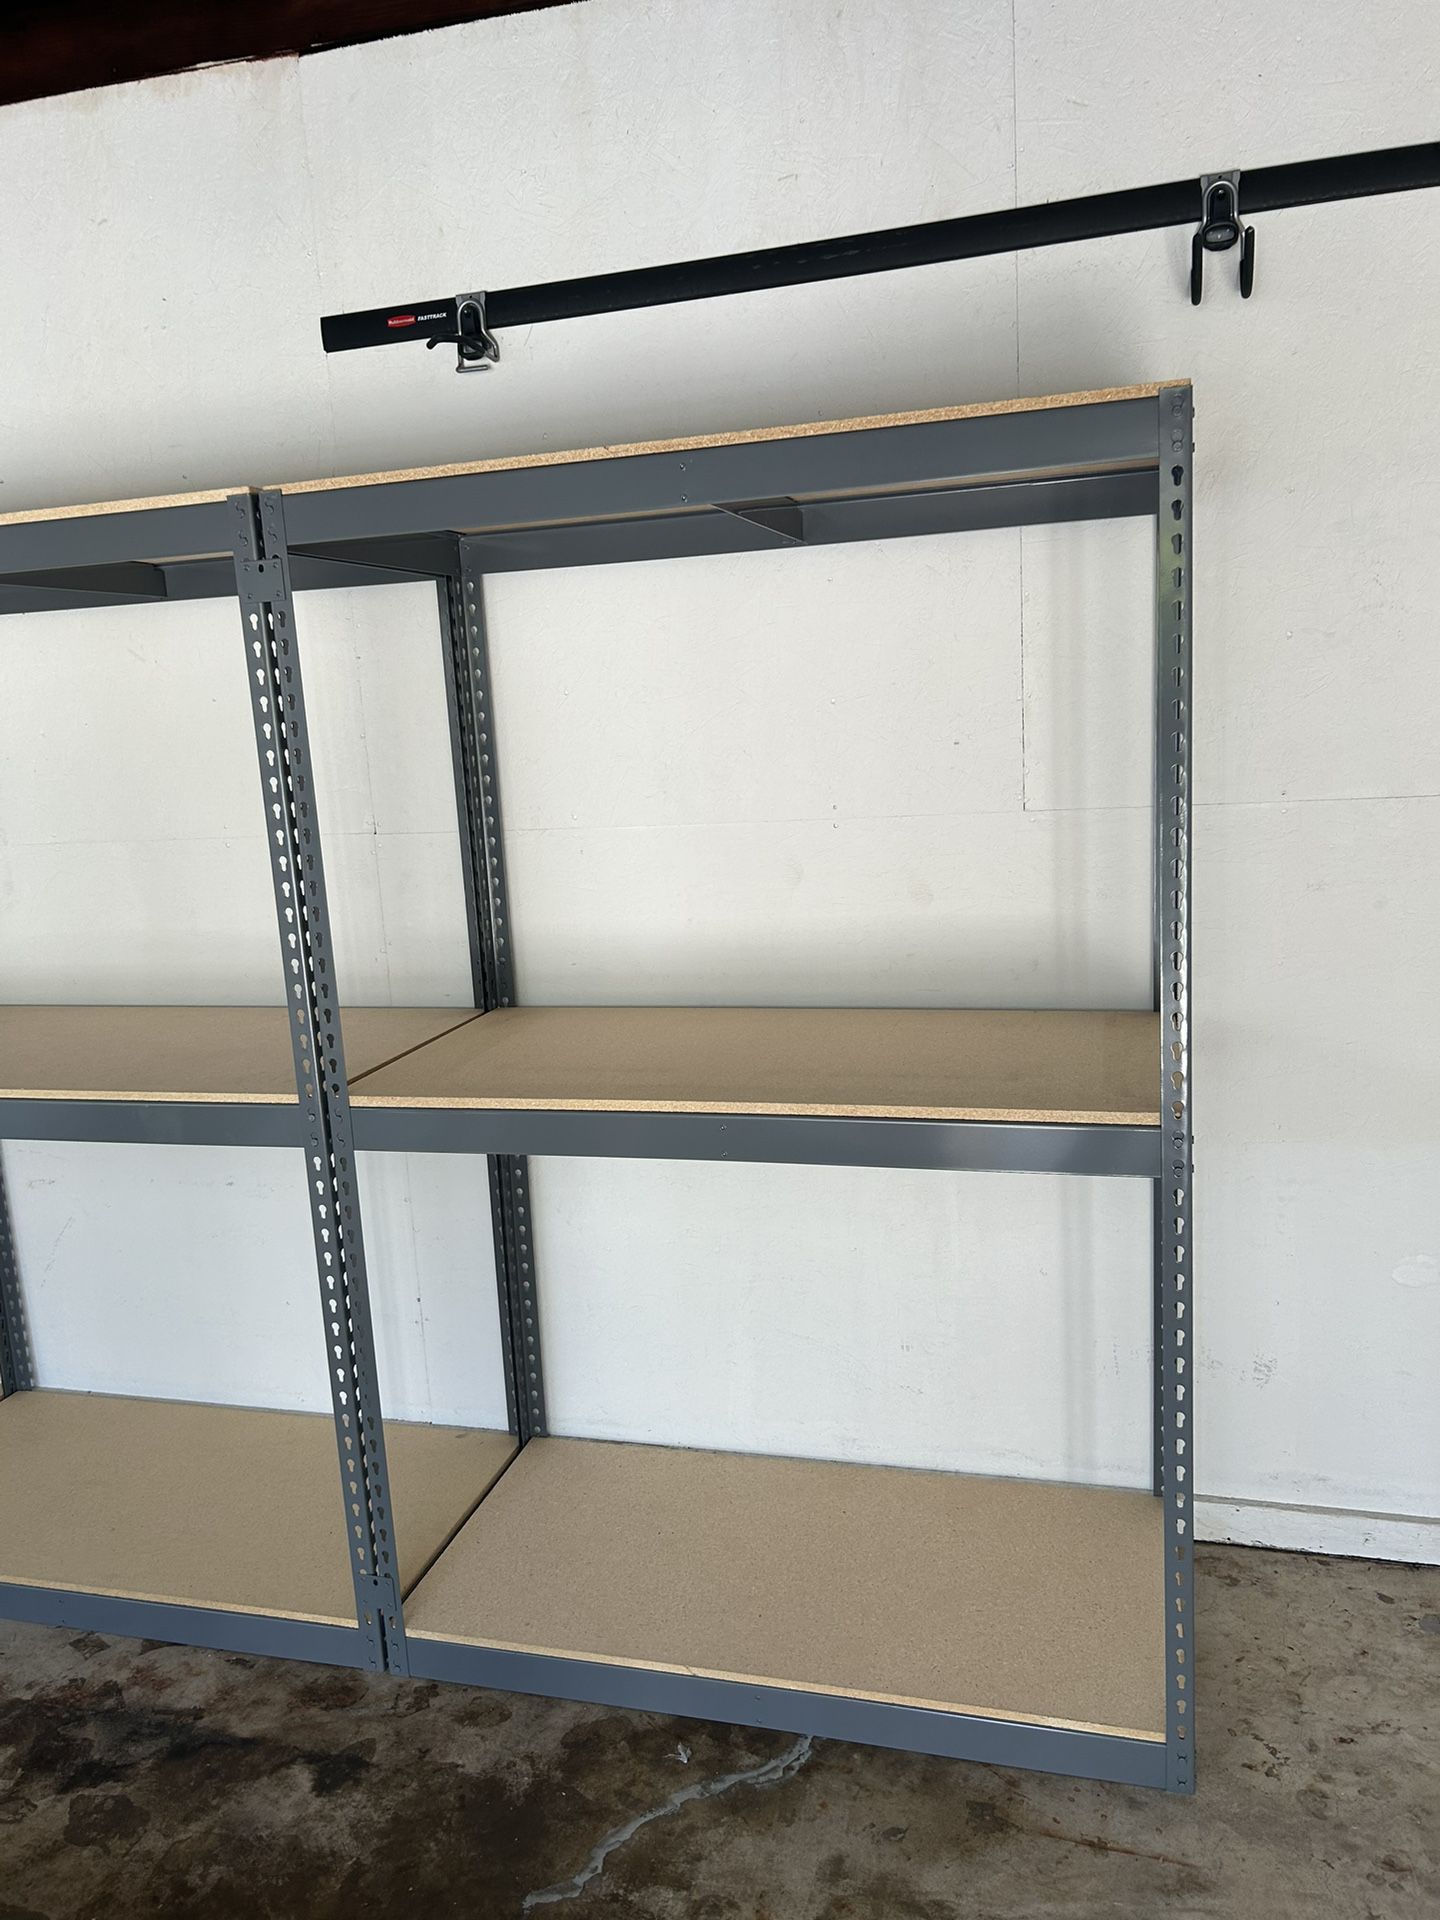 Shelving 48 in W x 24 in D Industrial Boltless Warehouse Storage Racks Stronger Than Homedepot Lowes And Costco Delivery Available